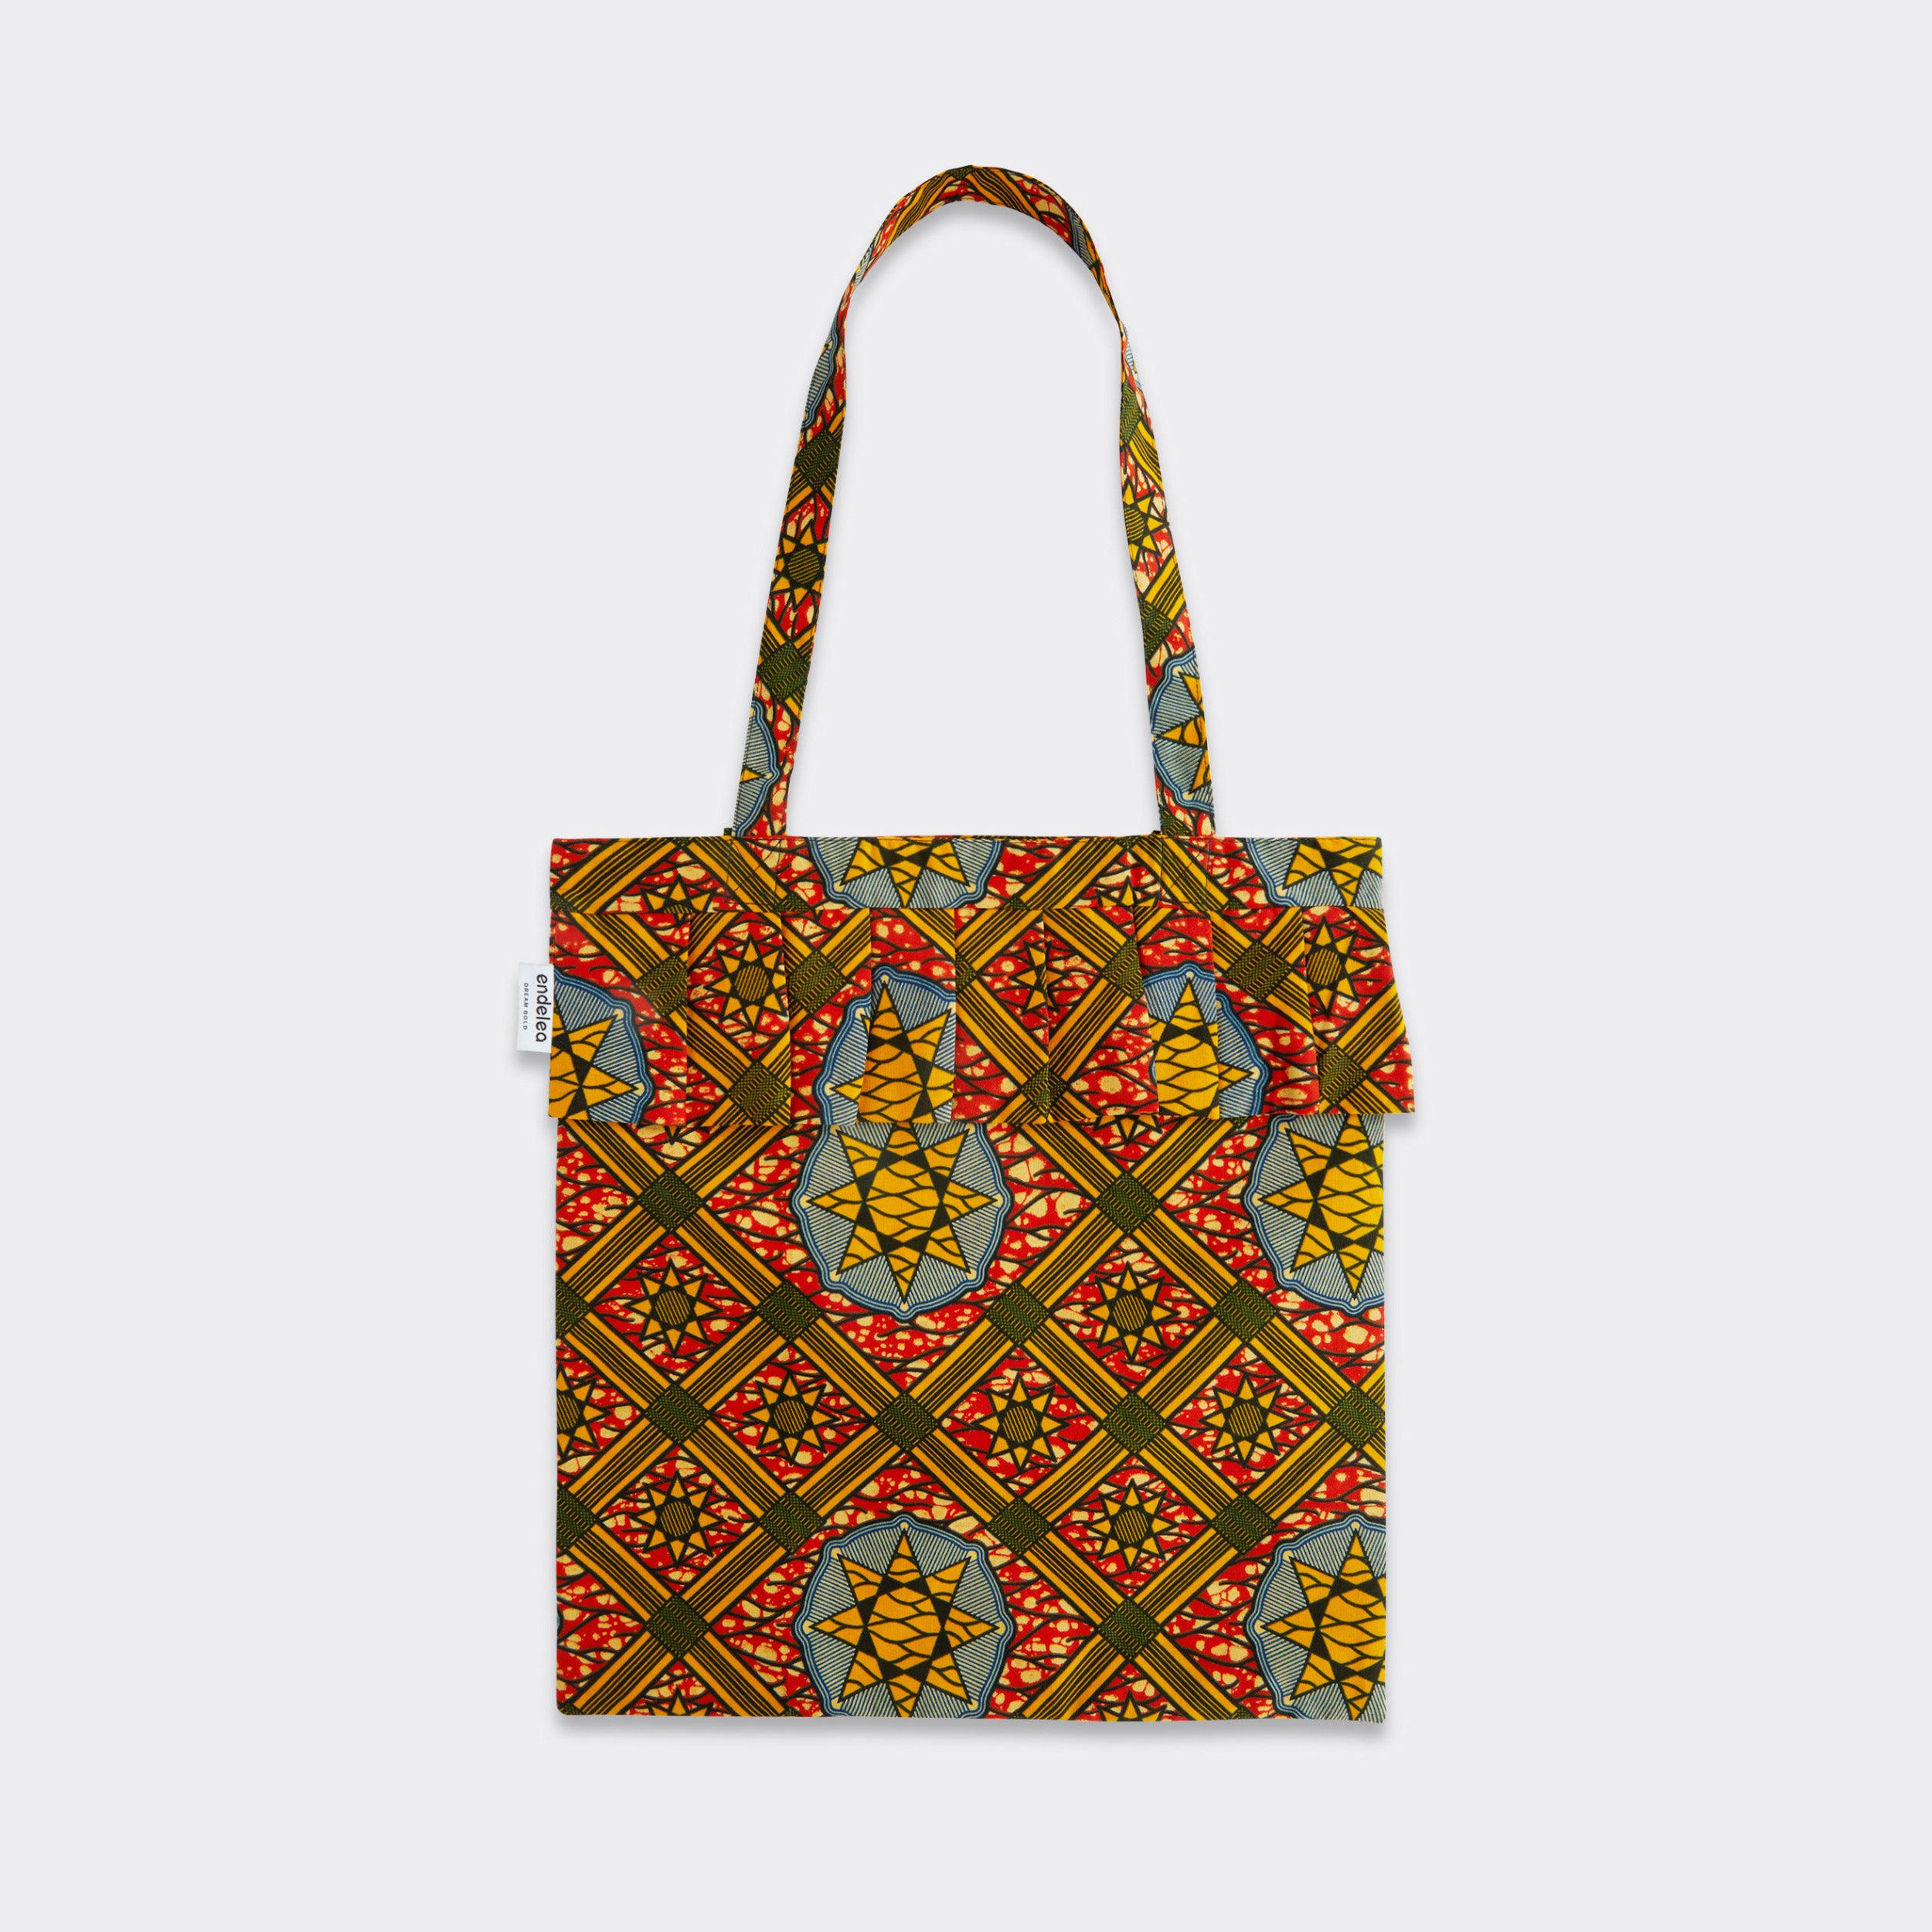 Still life: Tote Bag with Rouche in Wax Sun Labyrinth with colors yellow, red and blue.